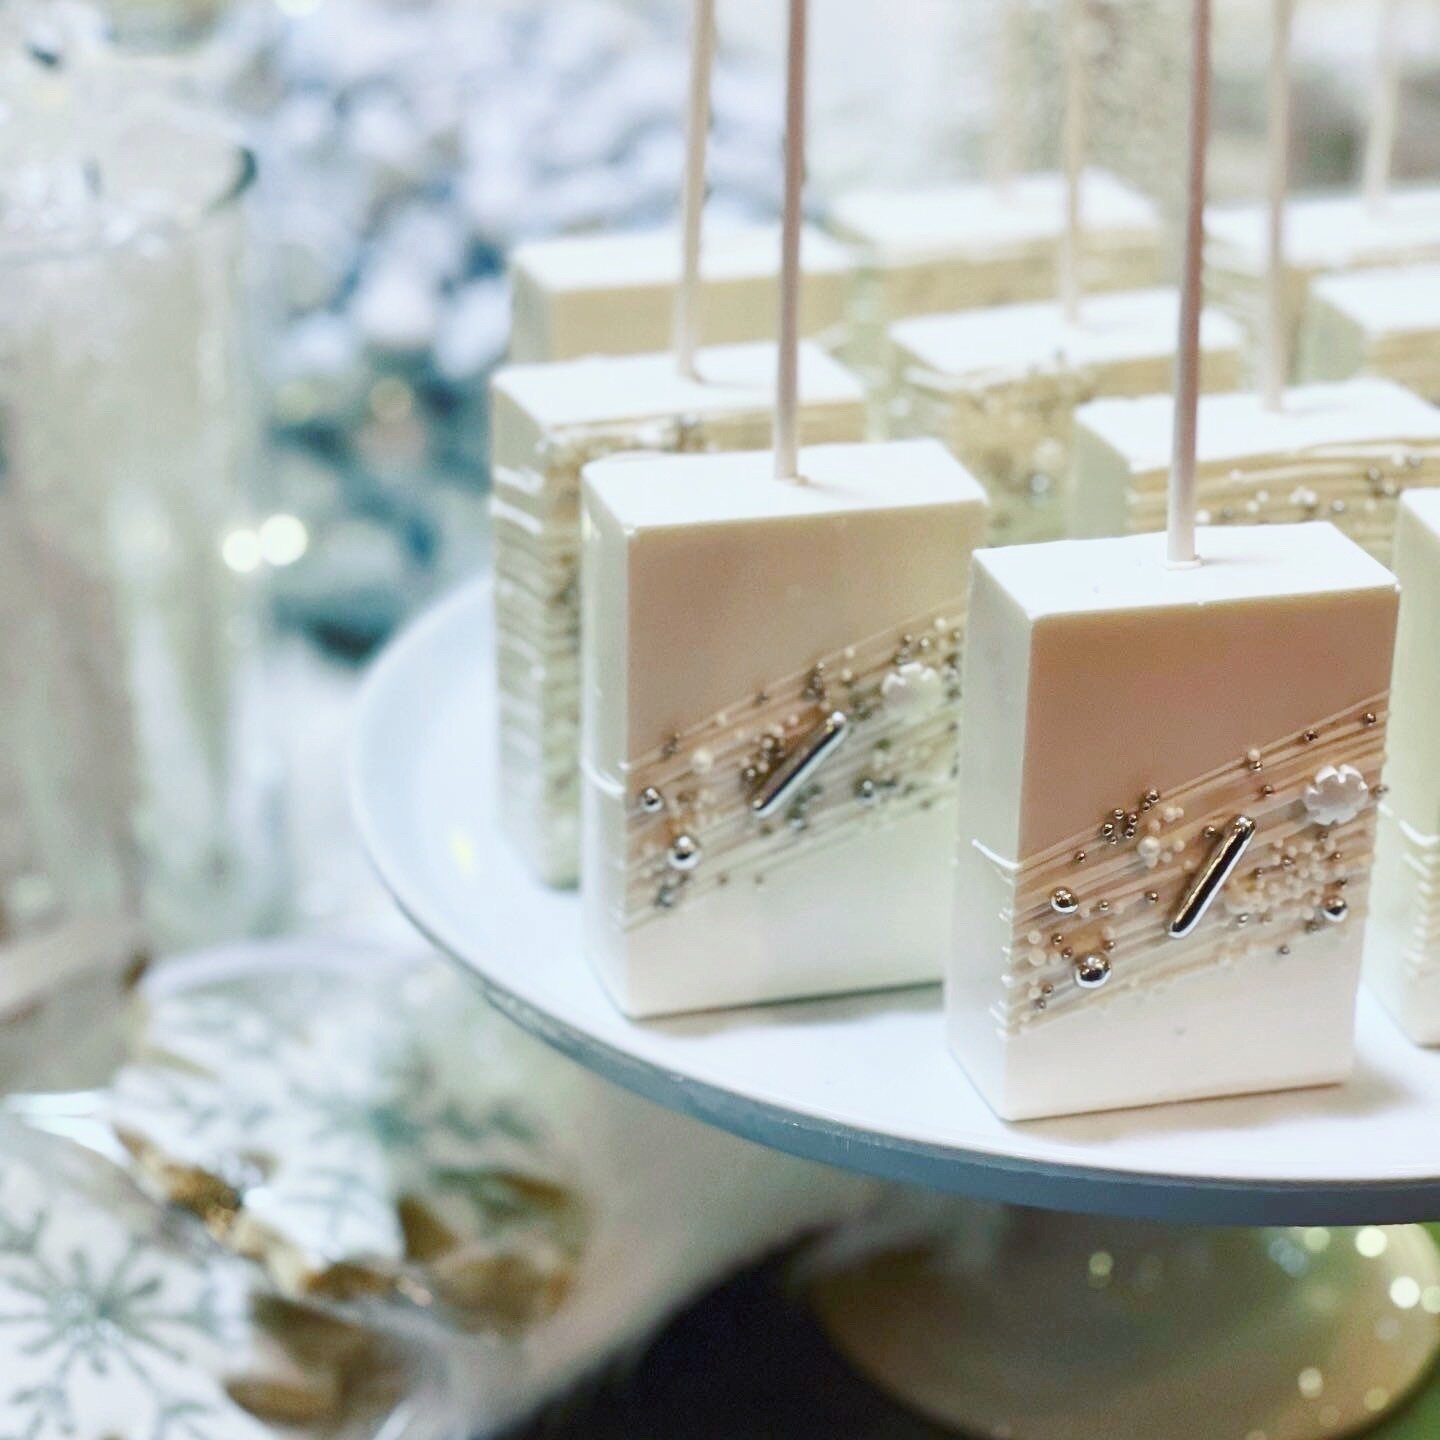 It&rsquo;s the most wonderful time of year, which means one thing: 𝑰𝑻𝑺 𝑷𝑨𝑹𝑻𝒀 𝑺𝑬𝑨𝑺𝑶𝑵✨ 

We coordinated a Winter Wonderland event, and the festive deserts were 𝑒𝓋𝑒𝓇𝓎𝓉𝒽𝒾𝓃𝑔!

Get creative with your holiday events with unique theme